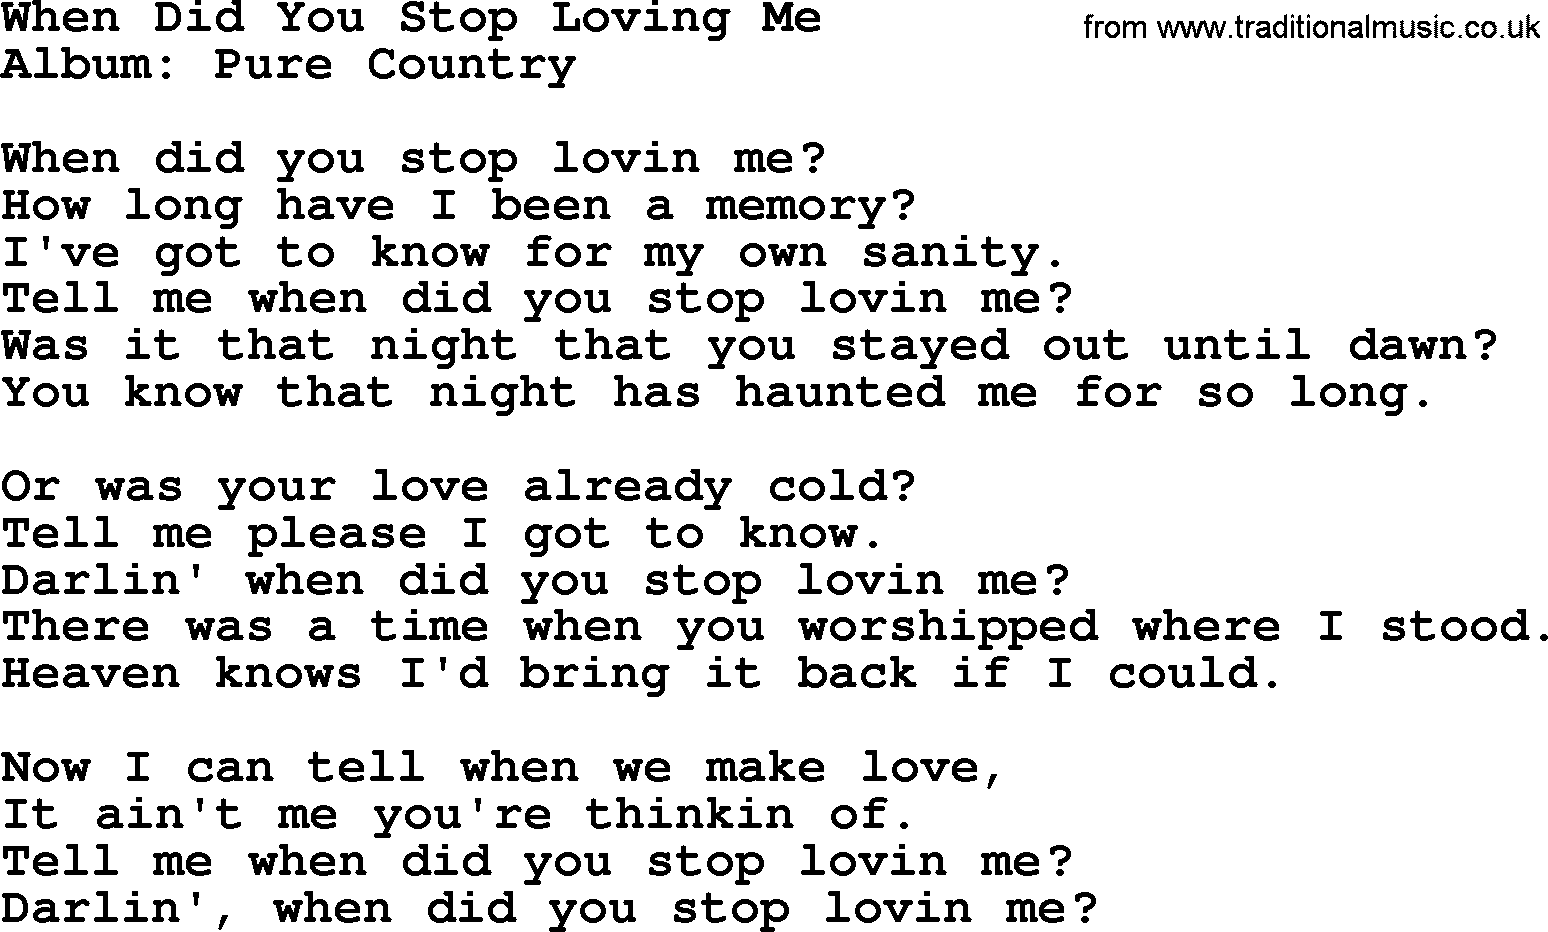 George Strait song: When Did You Stop Loving Me, lyrics